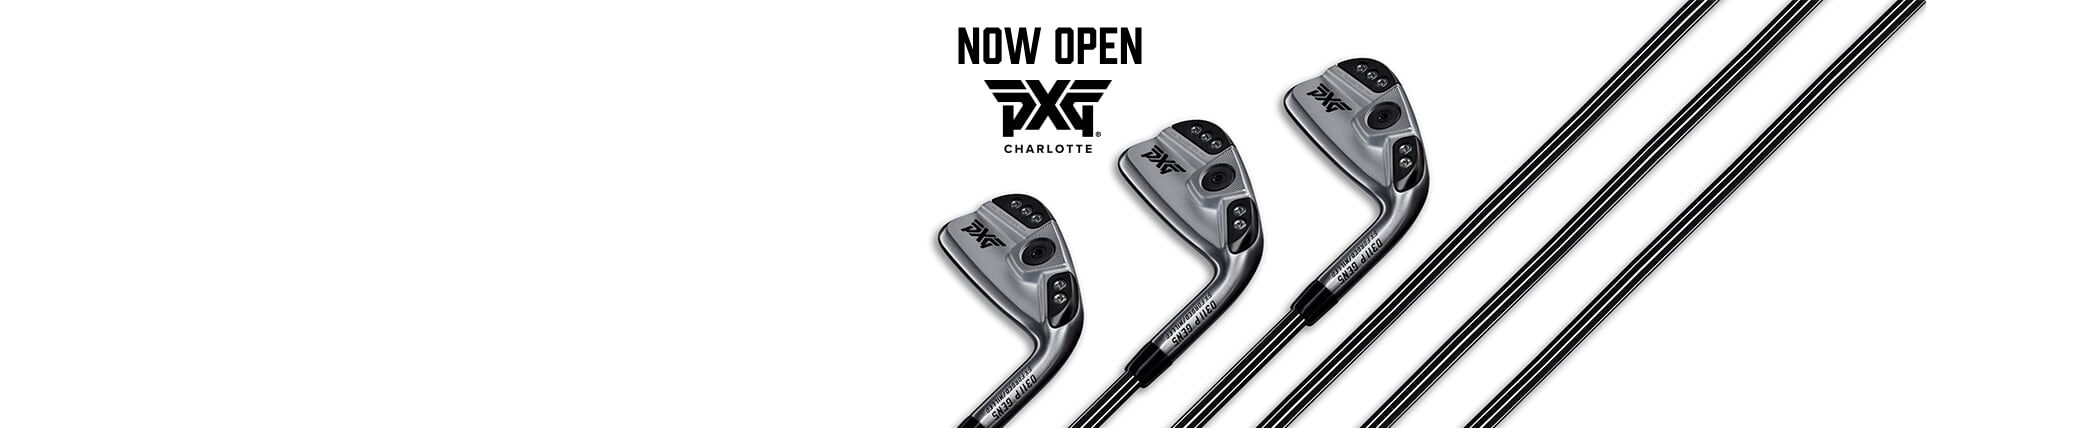 Opening Soon - PXG Westchester